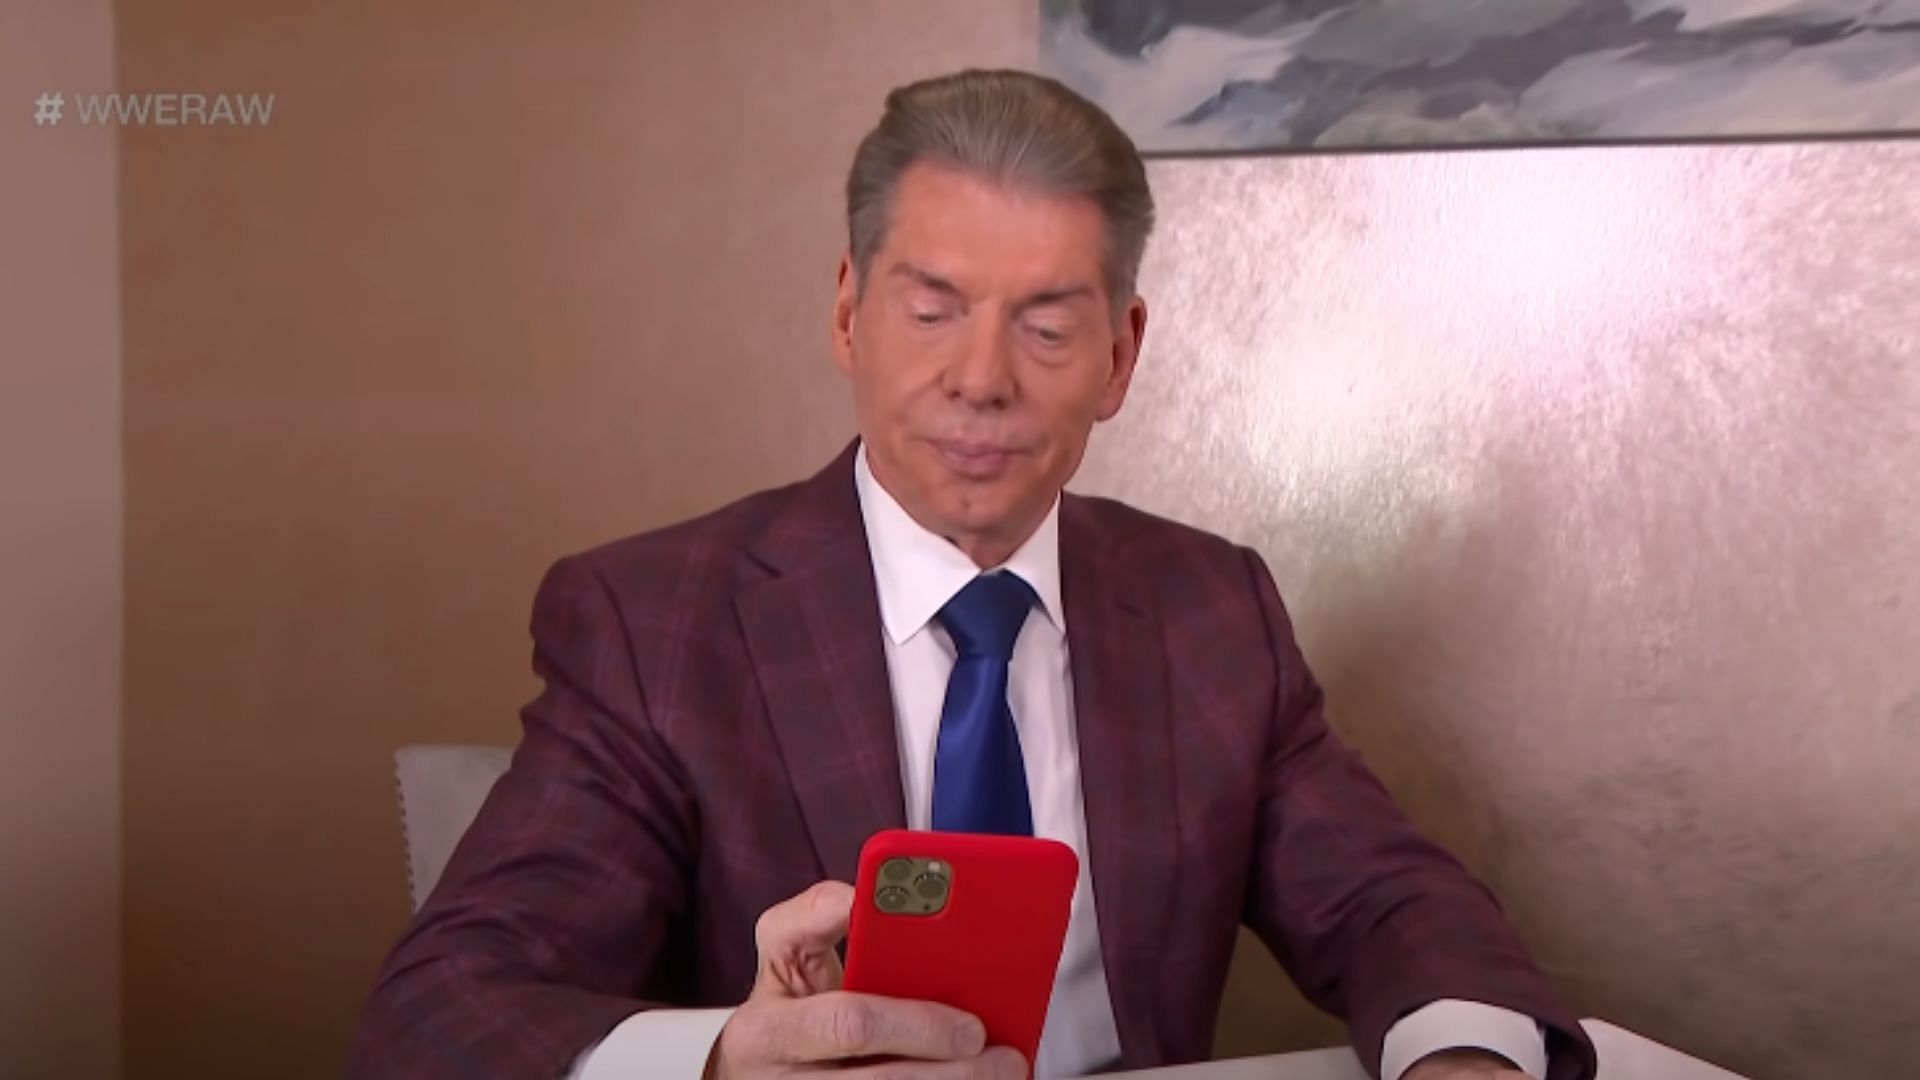 Vince McMahon ultimately decides which superstars appear on WWE television